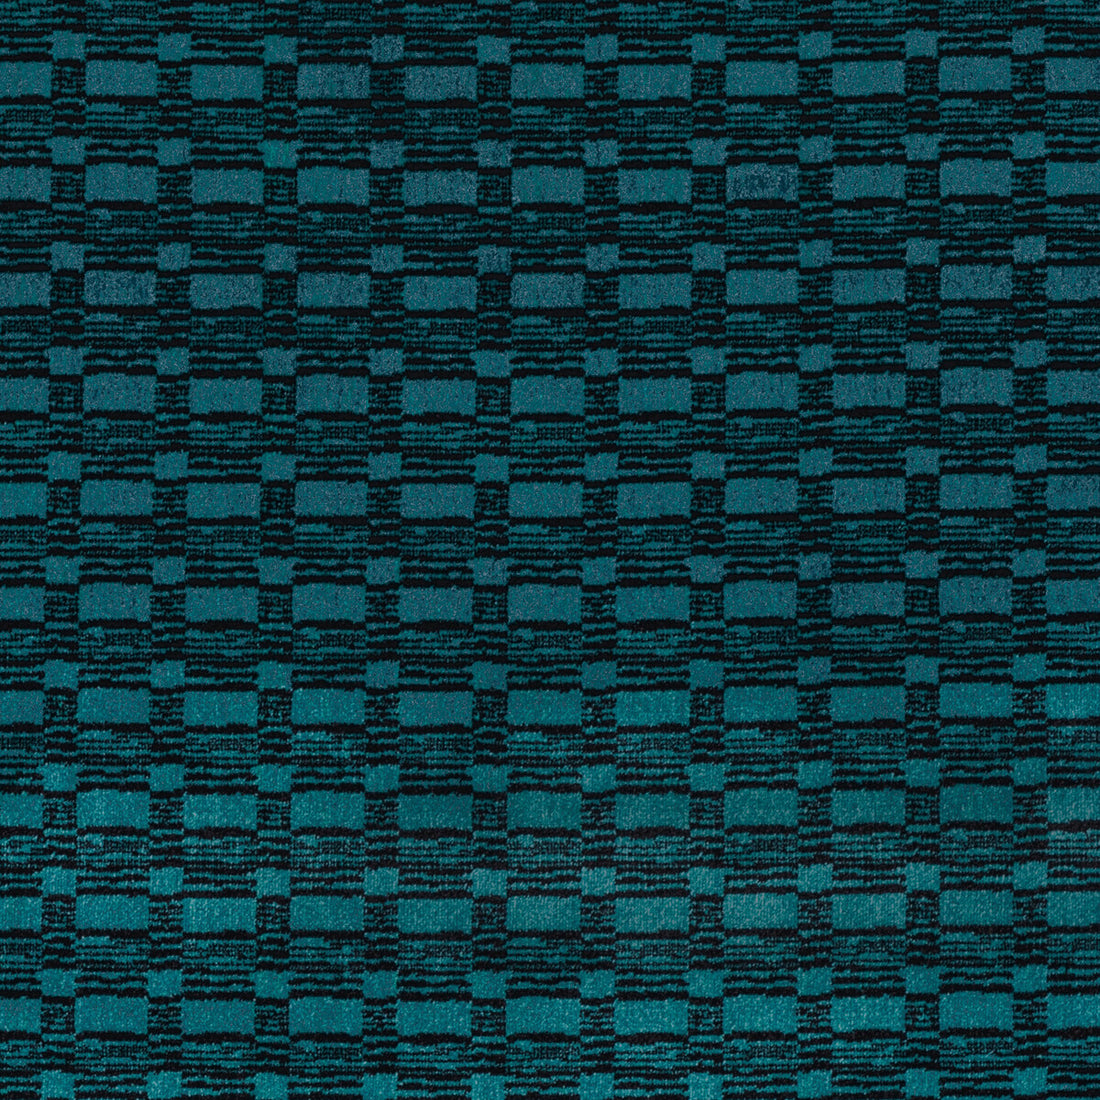 Lure fabric in jade/onyx color - pattern GWF-3760.58.0 - by Lee Jofa Modern in the Kelly Wearstler VI collection